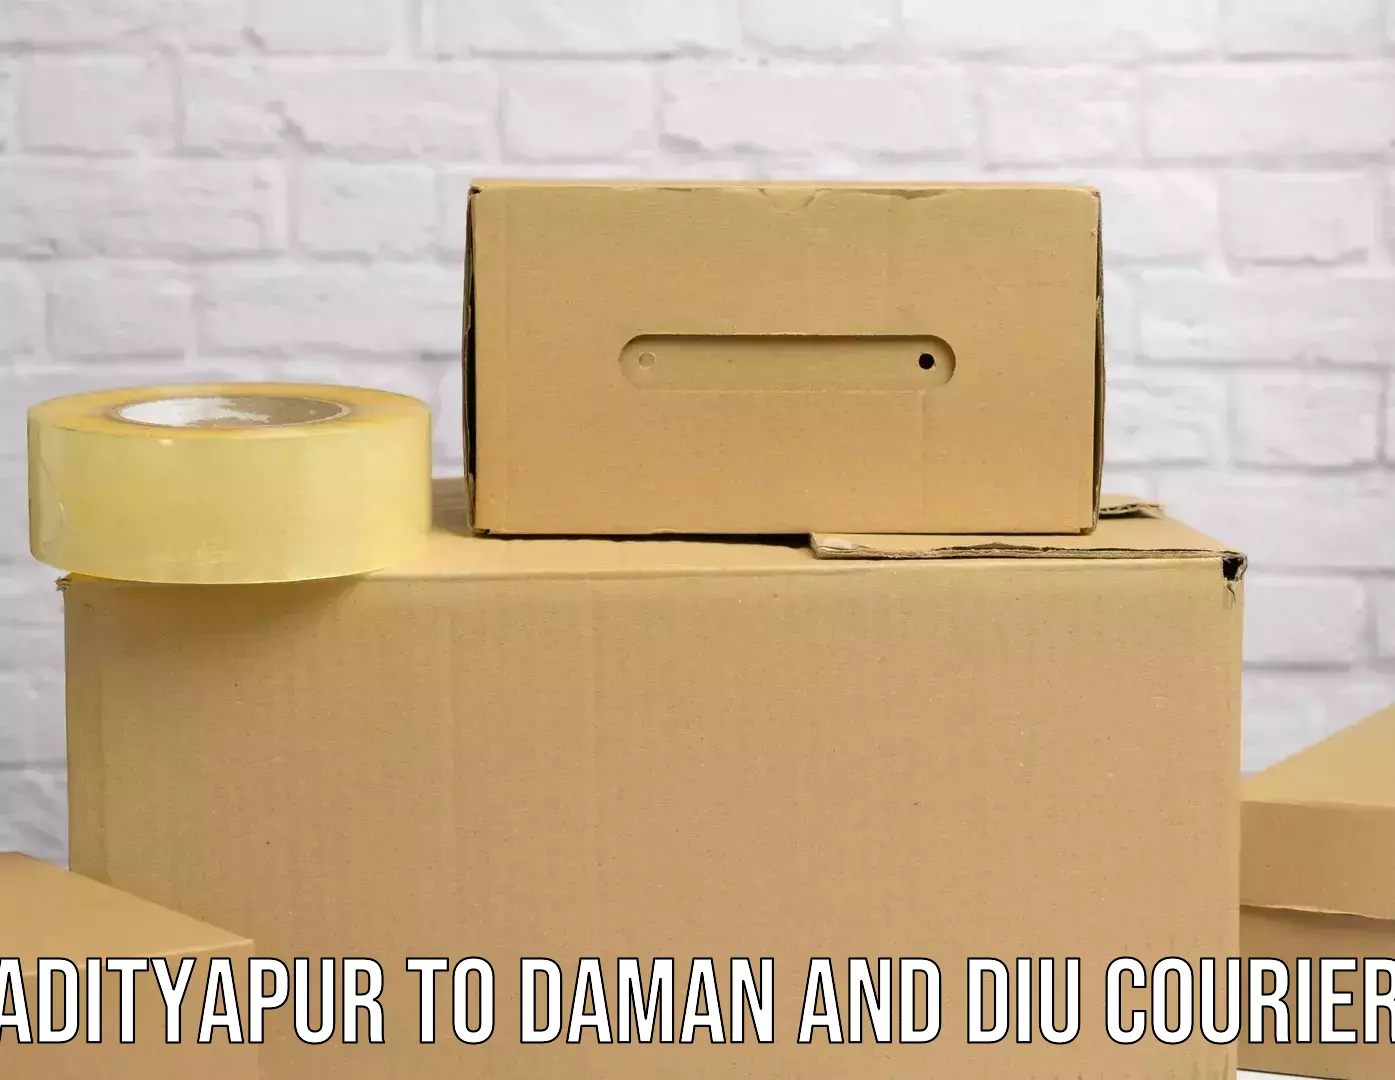 Cash on delivery service Adityapur to Daman and Diu